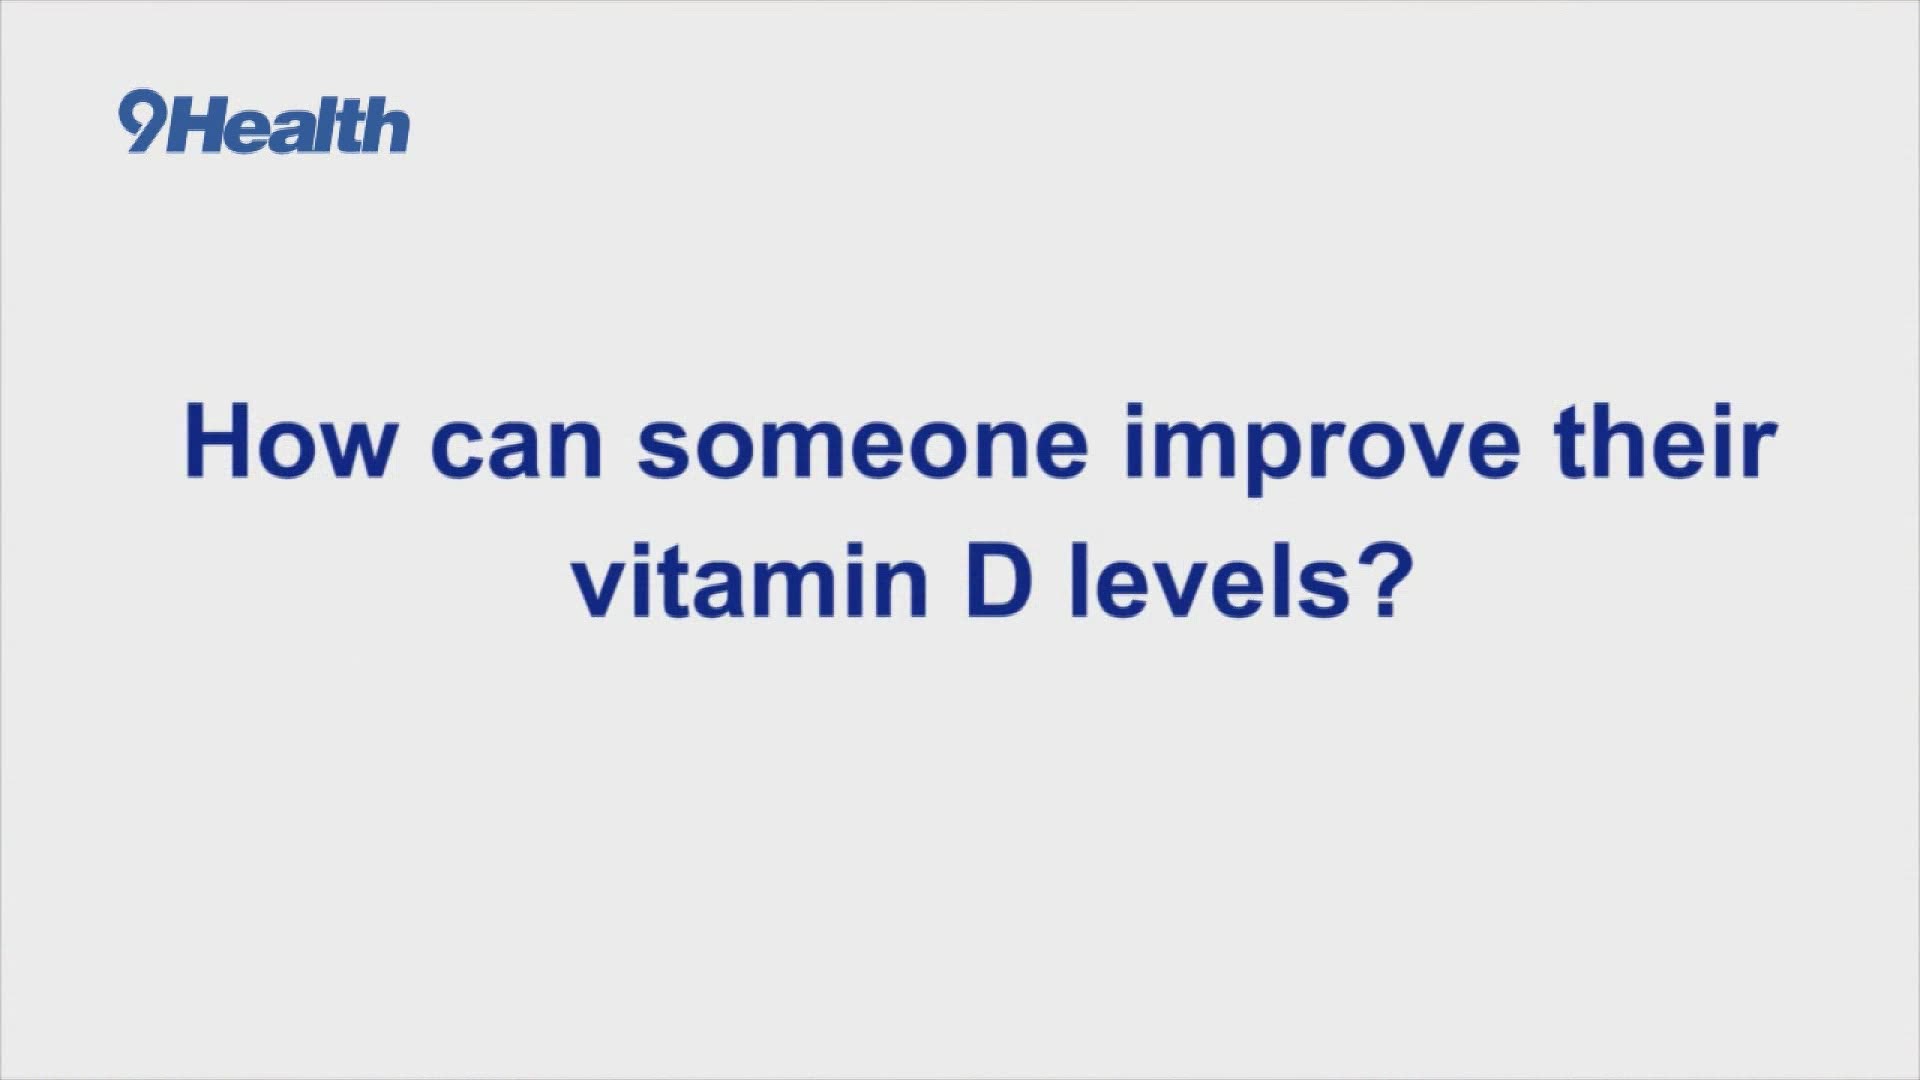 Low vitamin D levels have been associated with an increased risk of heart disease. 9Health Expert, Dr. Payal Kohli, explains.